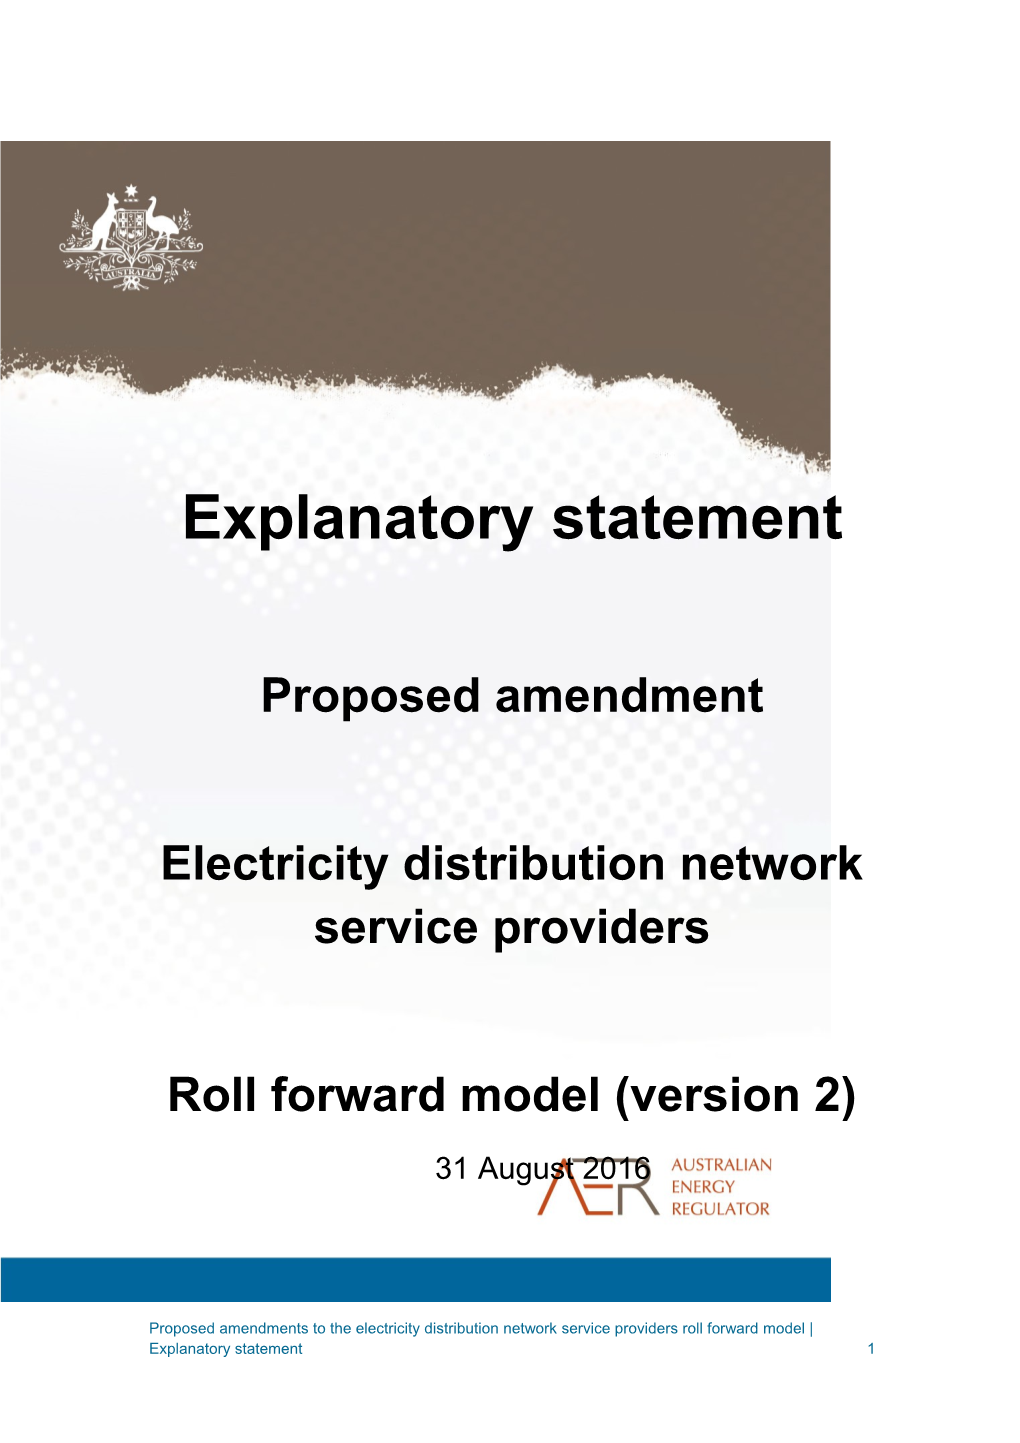 Explanatory Statement - Proposed Amended Distribution Roll Forward Model